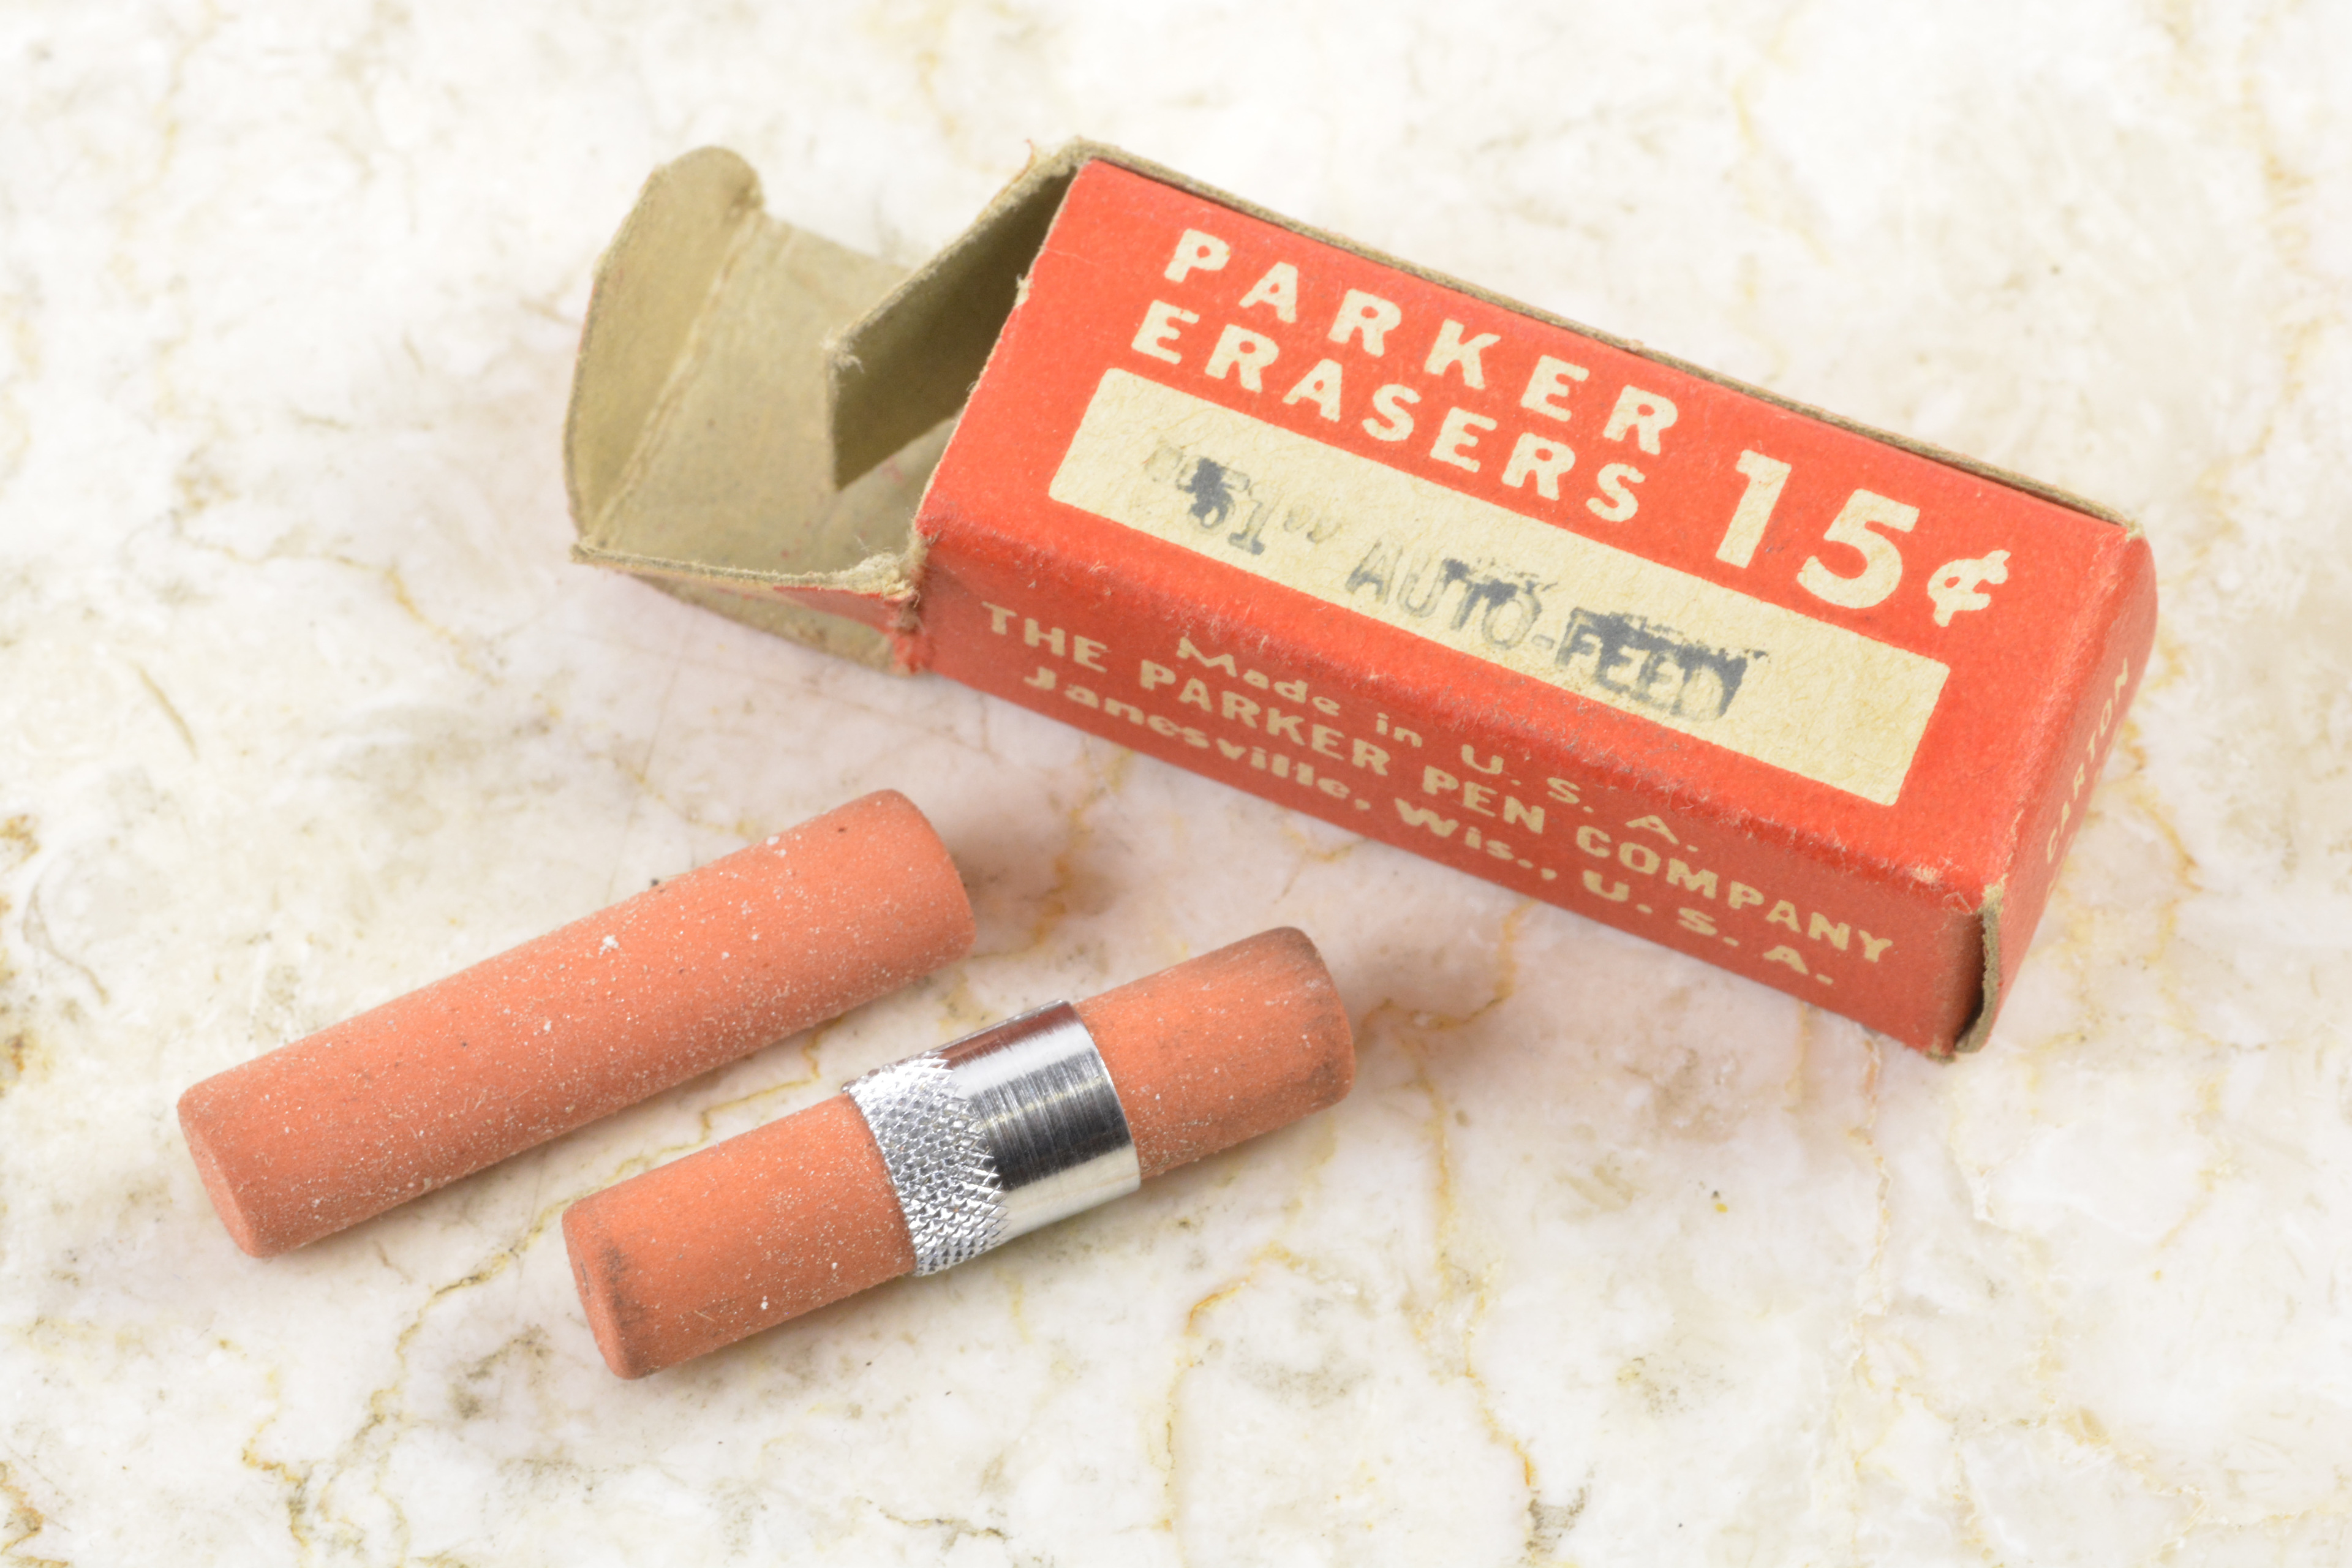 Vintage Parker 51 Autofeed Erasers 2 Erasers Per Box New Old Stock Product 